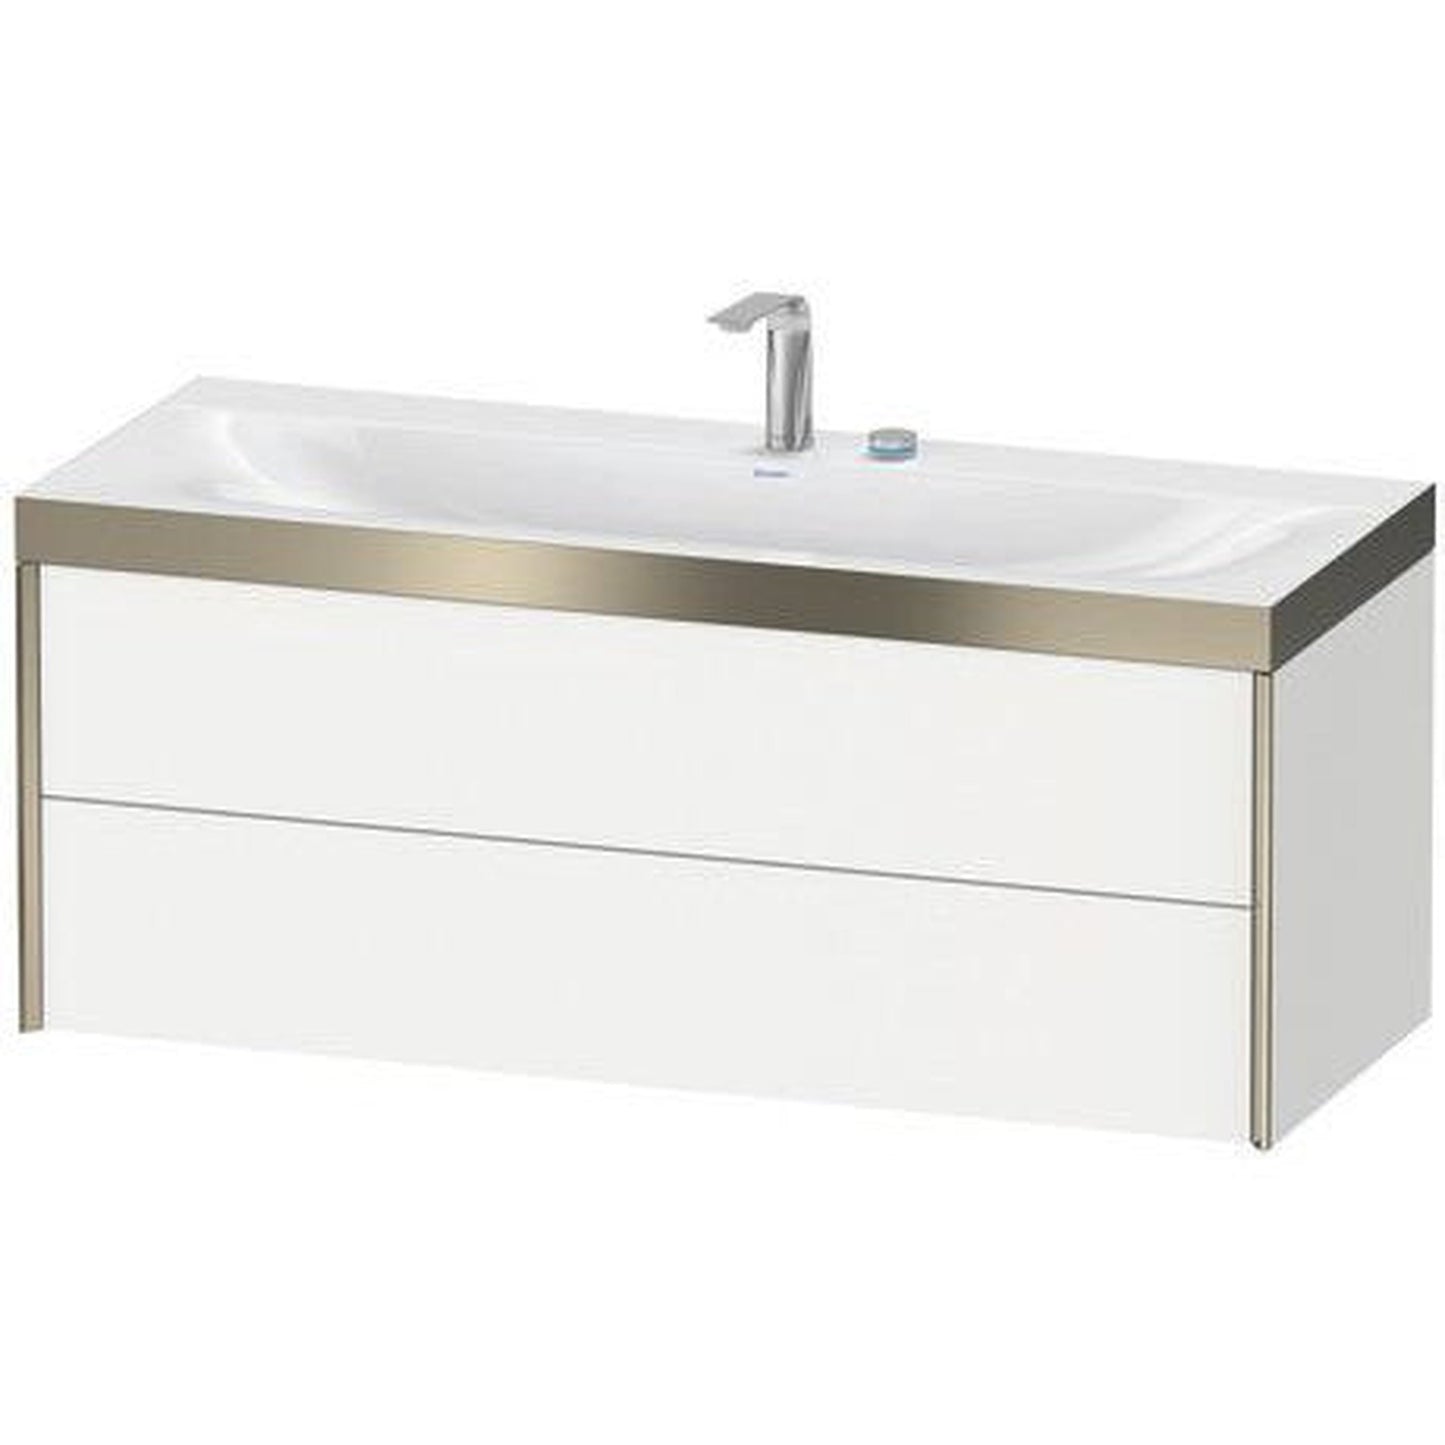 Duravit Xviu 47" x 20" x 19" Two Drawer C-Bonded Wall-Mount Vanity Kit With One Tap Hole, Dolomite Gray (XV4617OB238P)